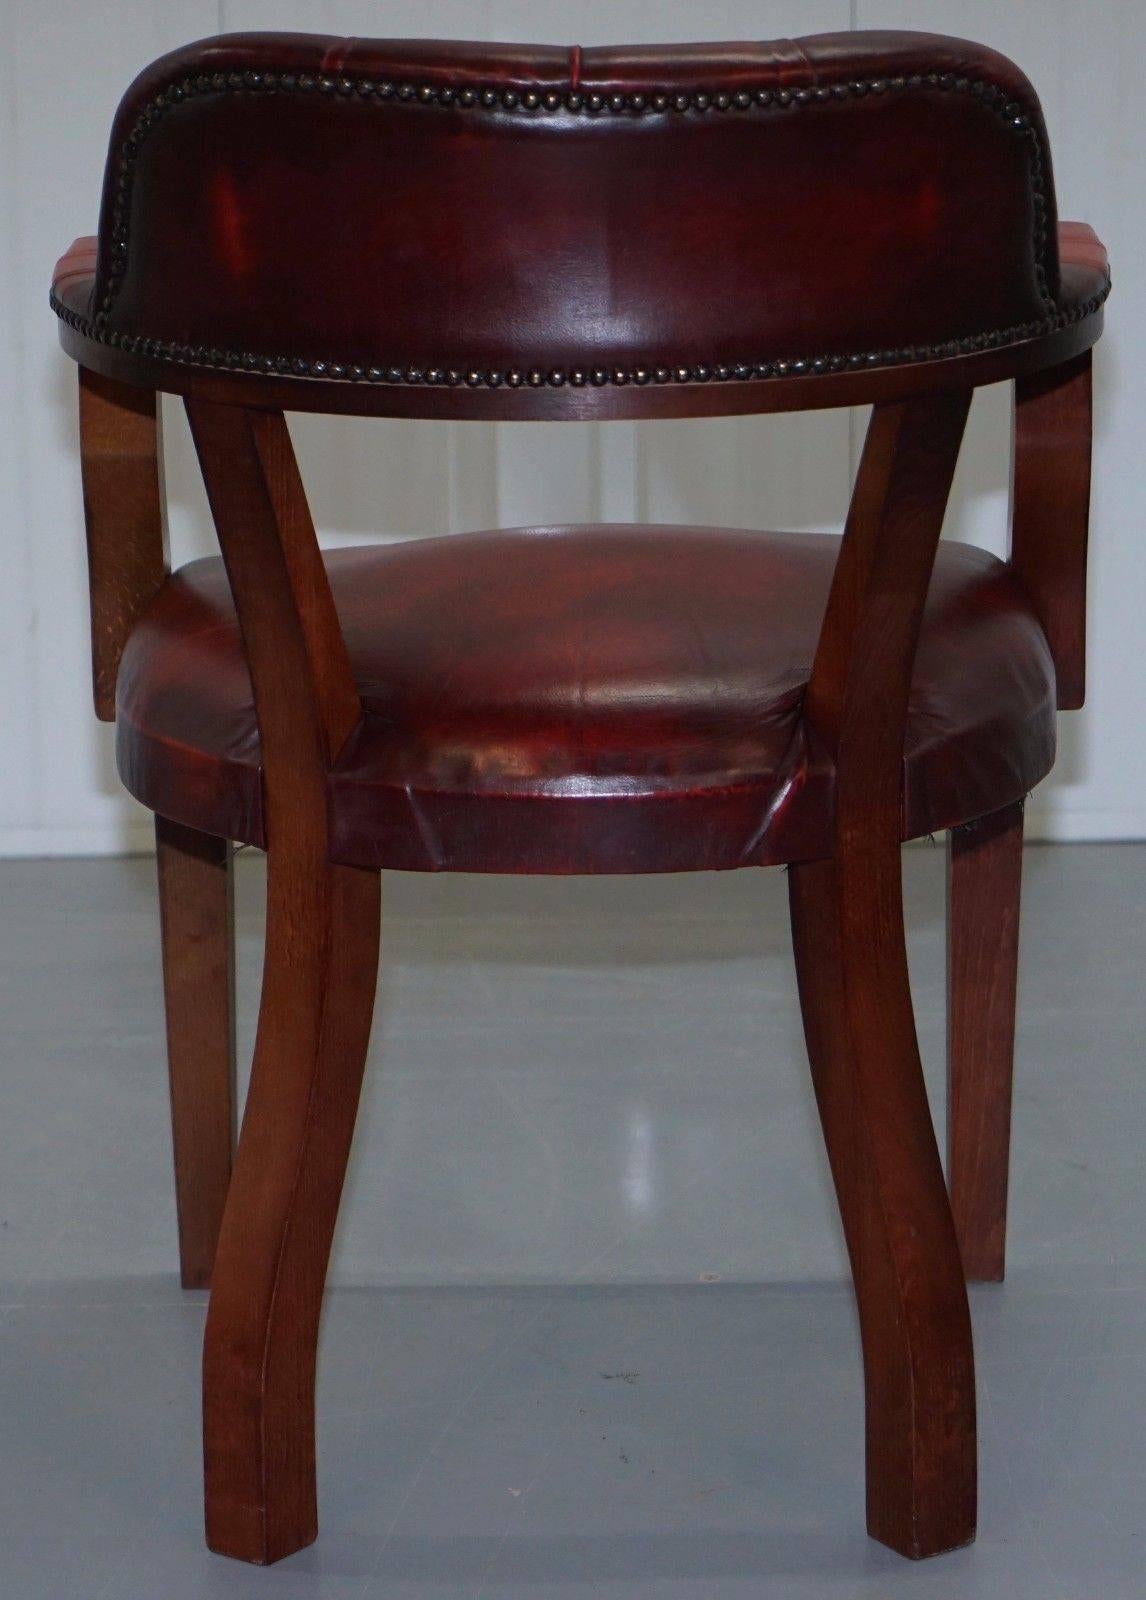 Lovely Oxblood Leather Chesterfield Court Chair for Desks or Guests Lovely Find 2